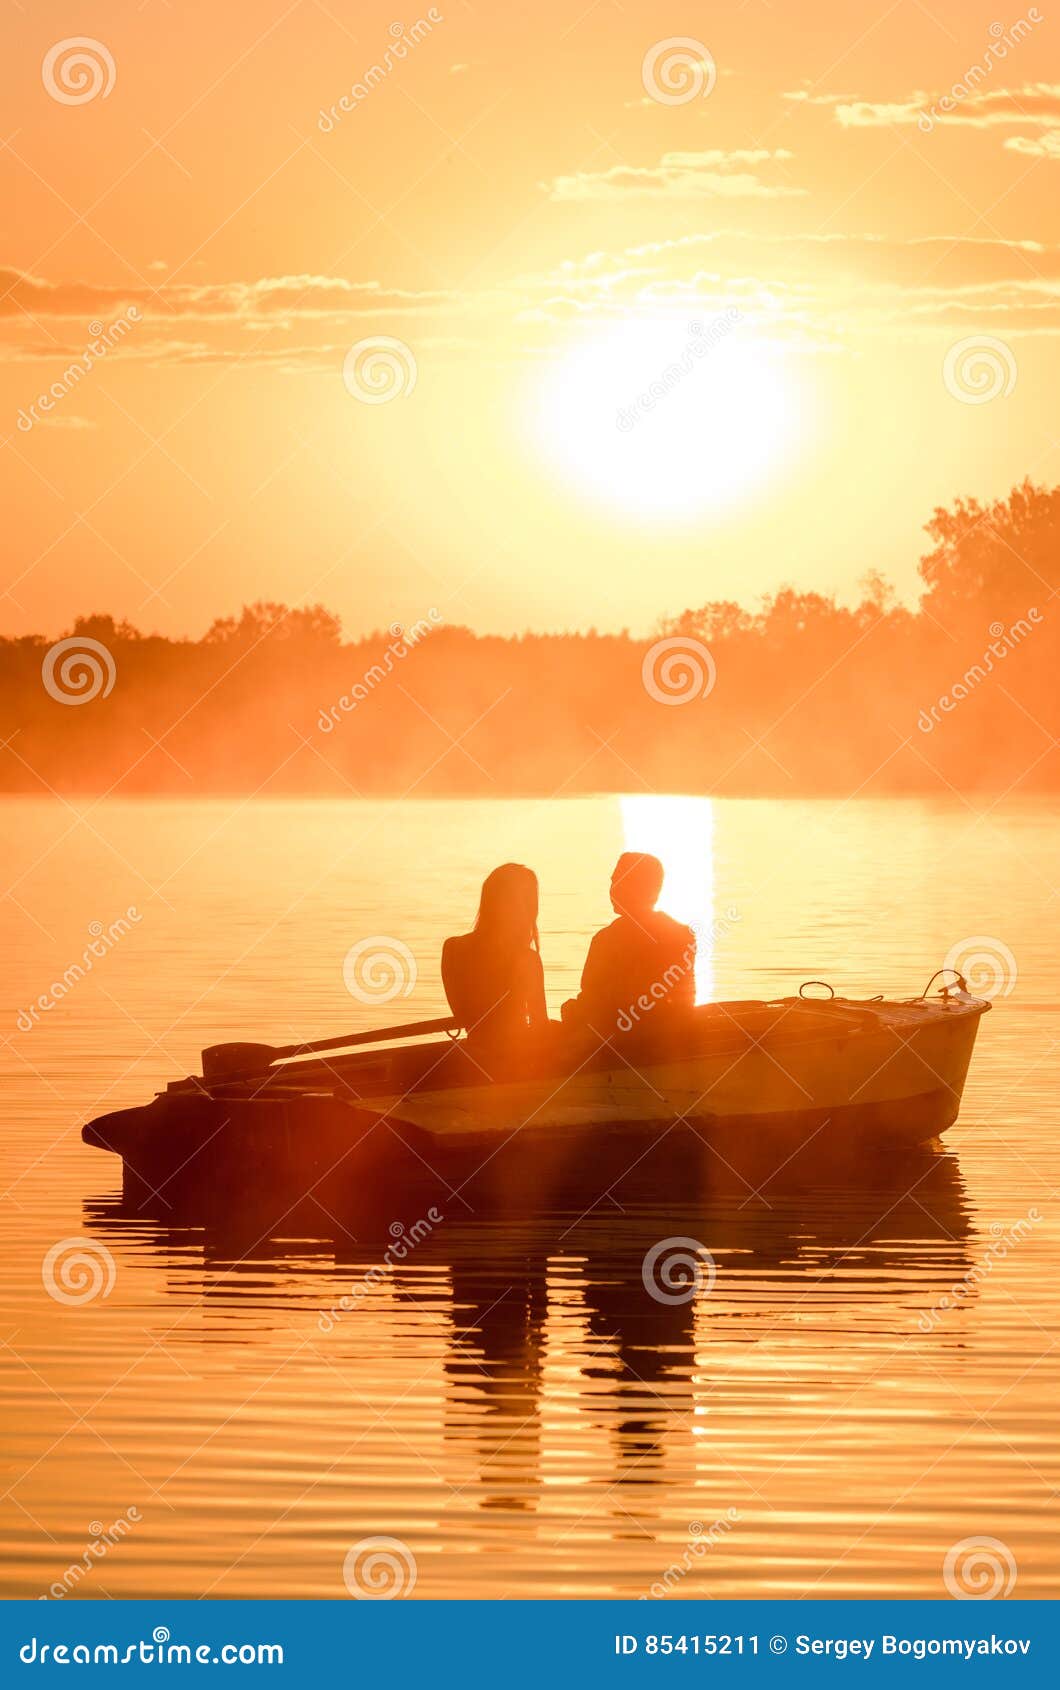 couple in love silhouette at lake sunset royalty-free